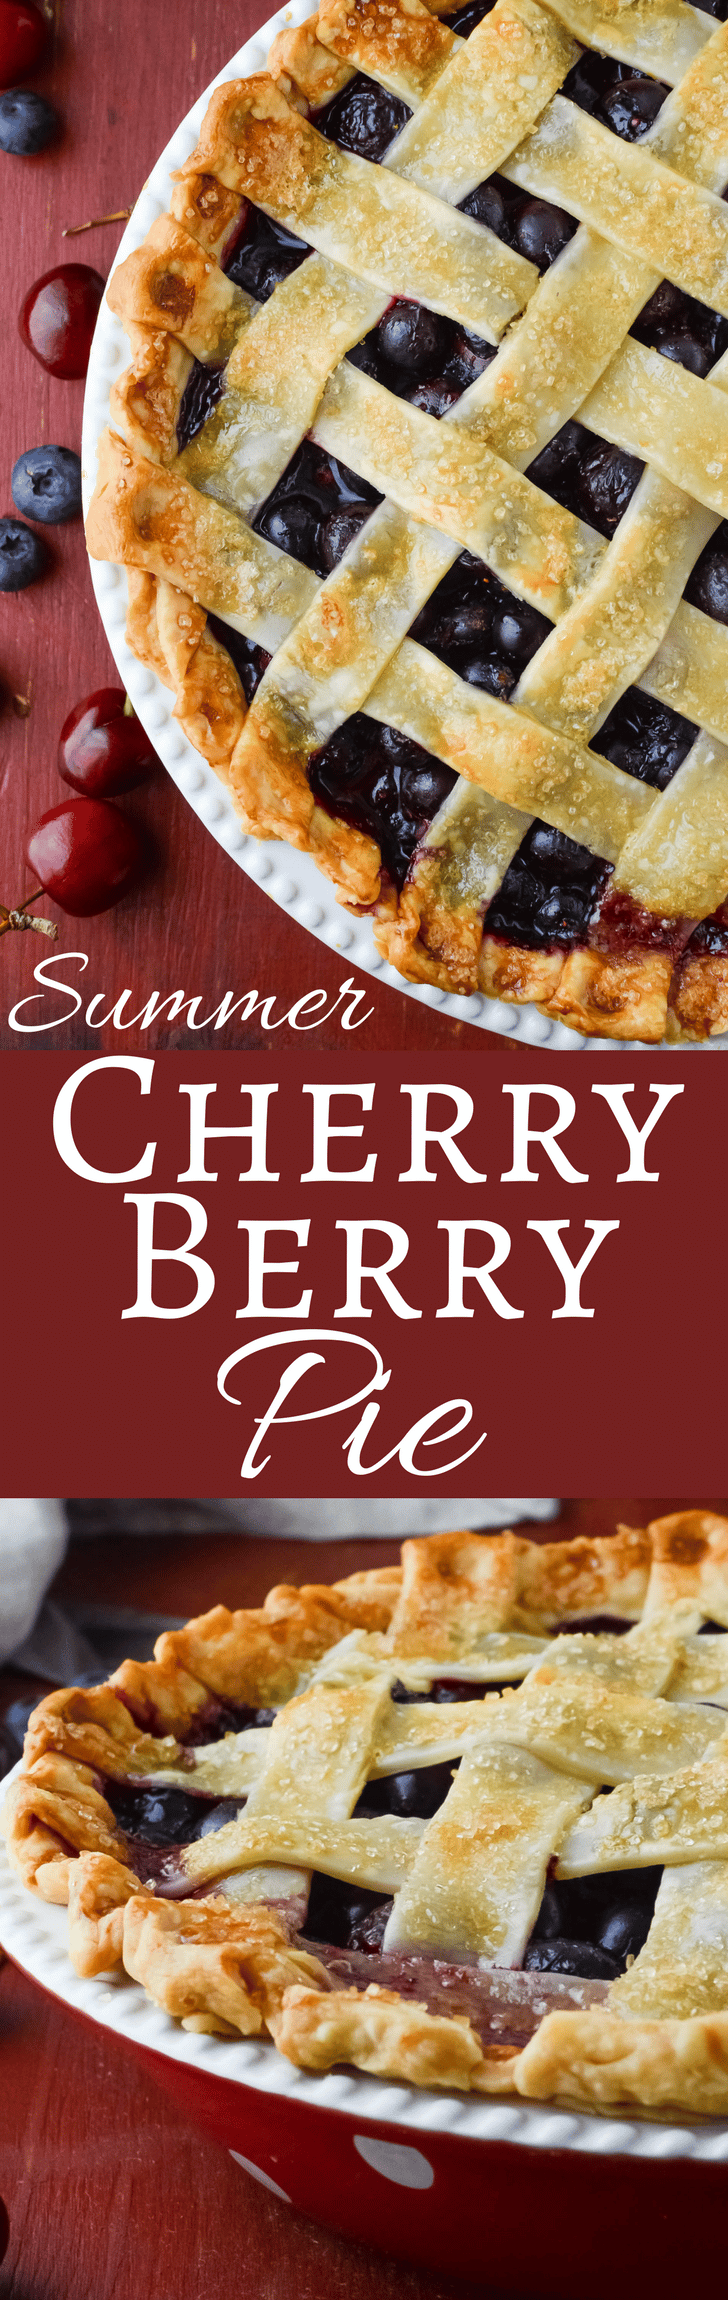 Ever wondered how to make a homemade fruit pie? Summer Cherry Berry Pie is easy to assemble and a showstopper to serve!